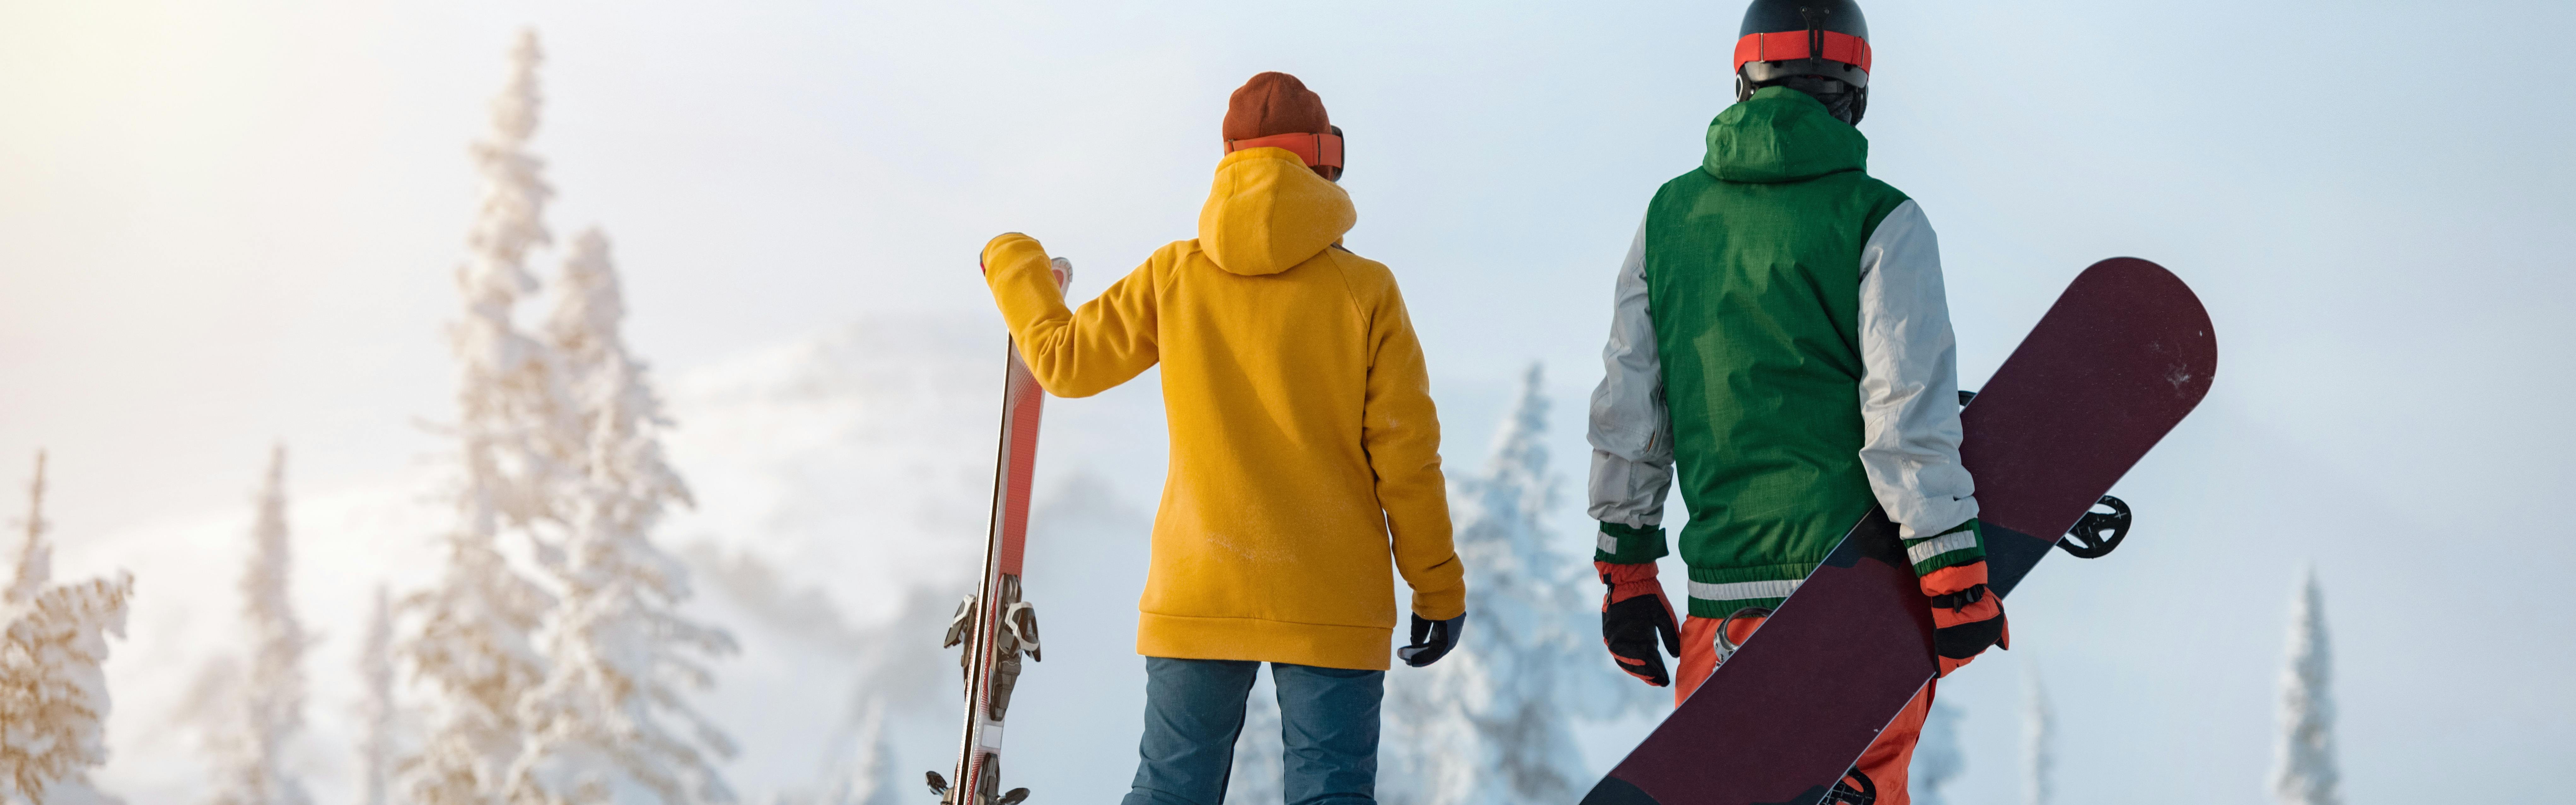 A skier and snowboarder standing at the top of a ski run holding their gear. 